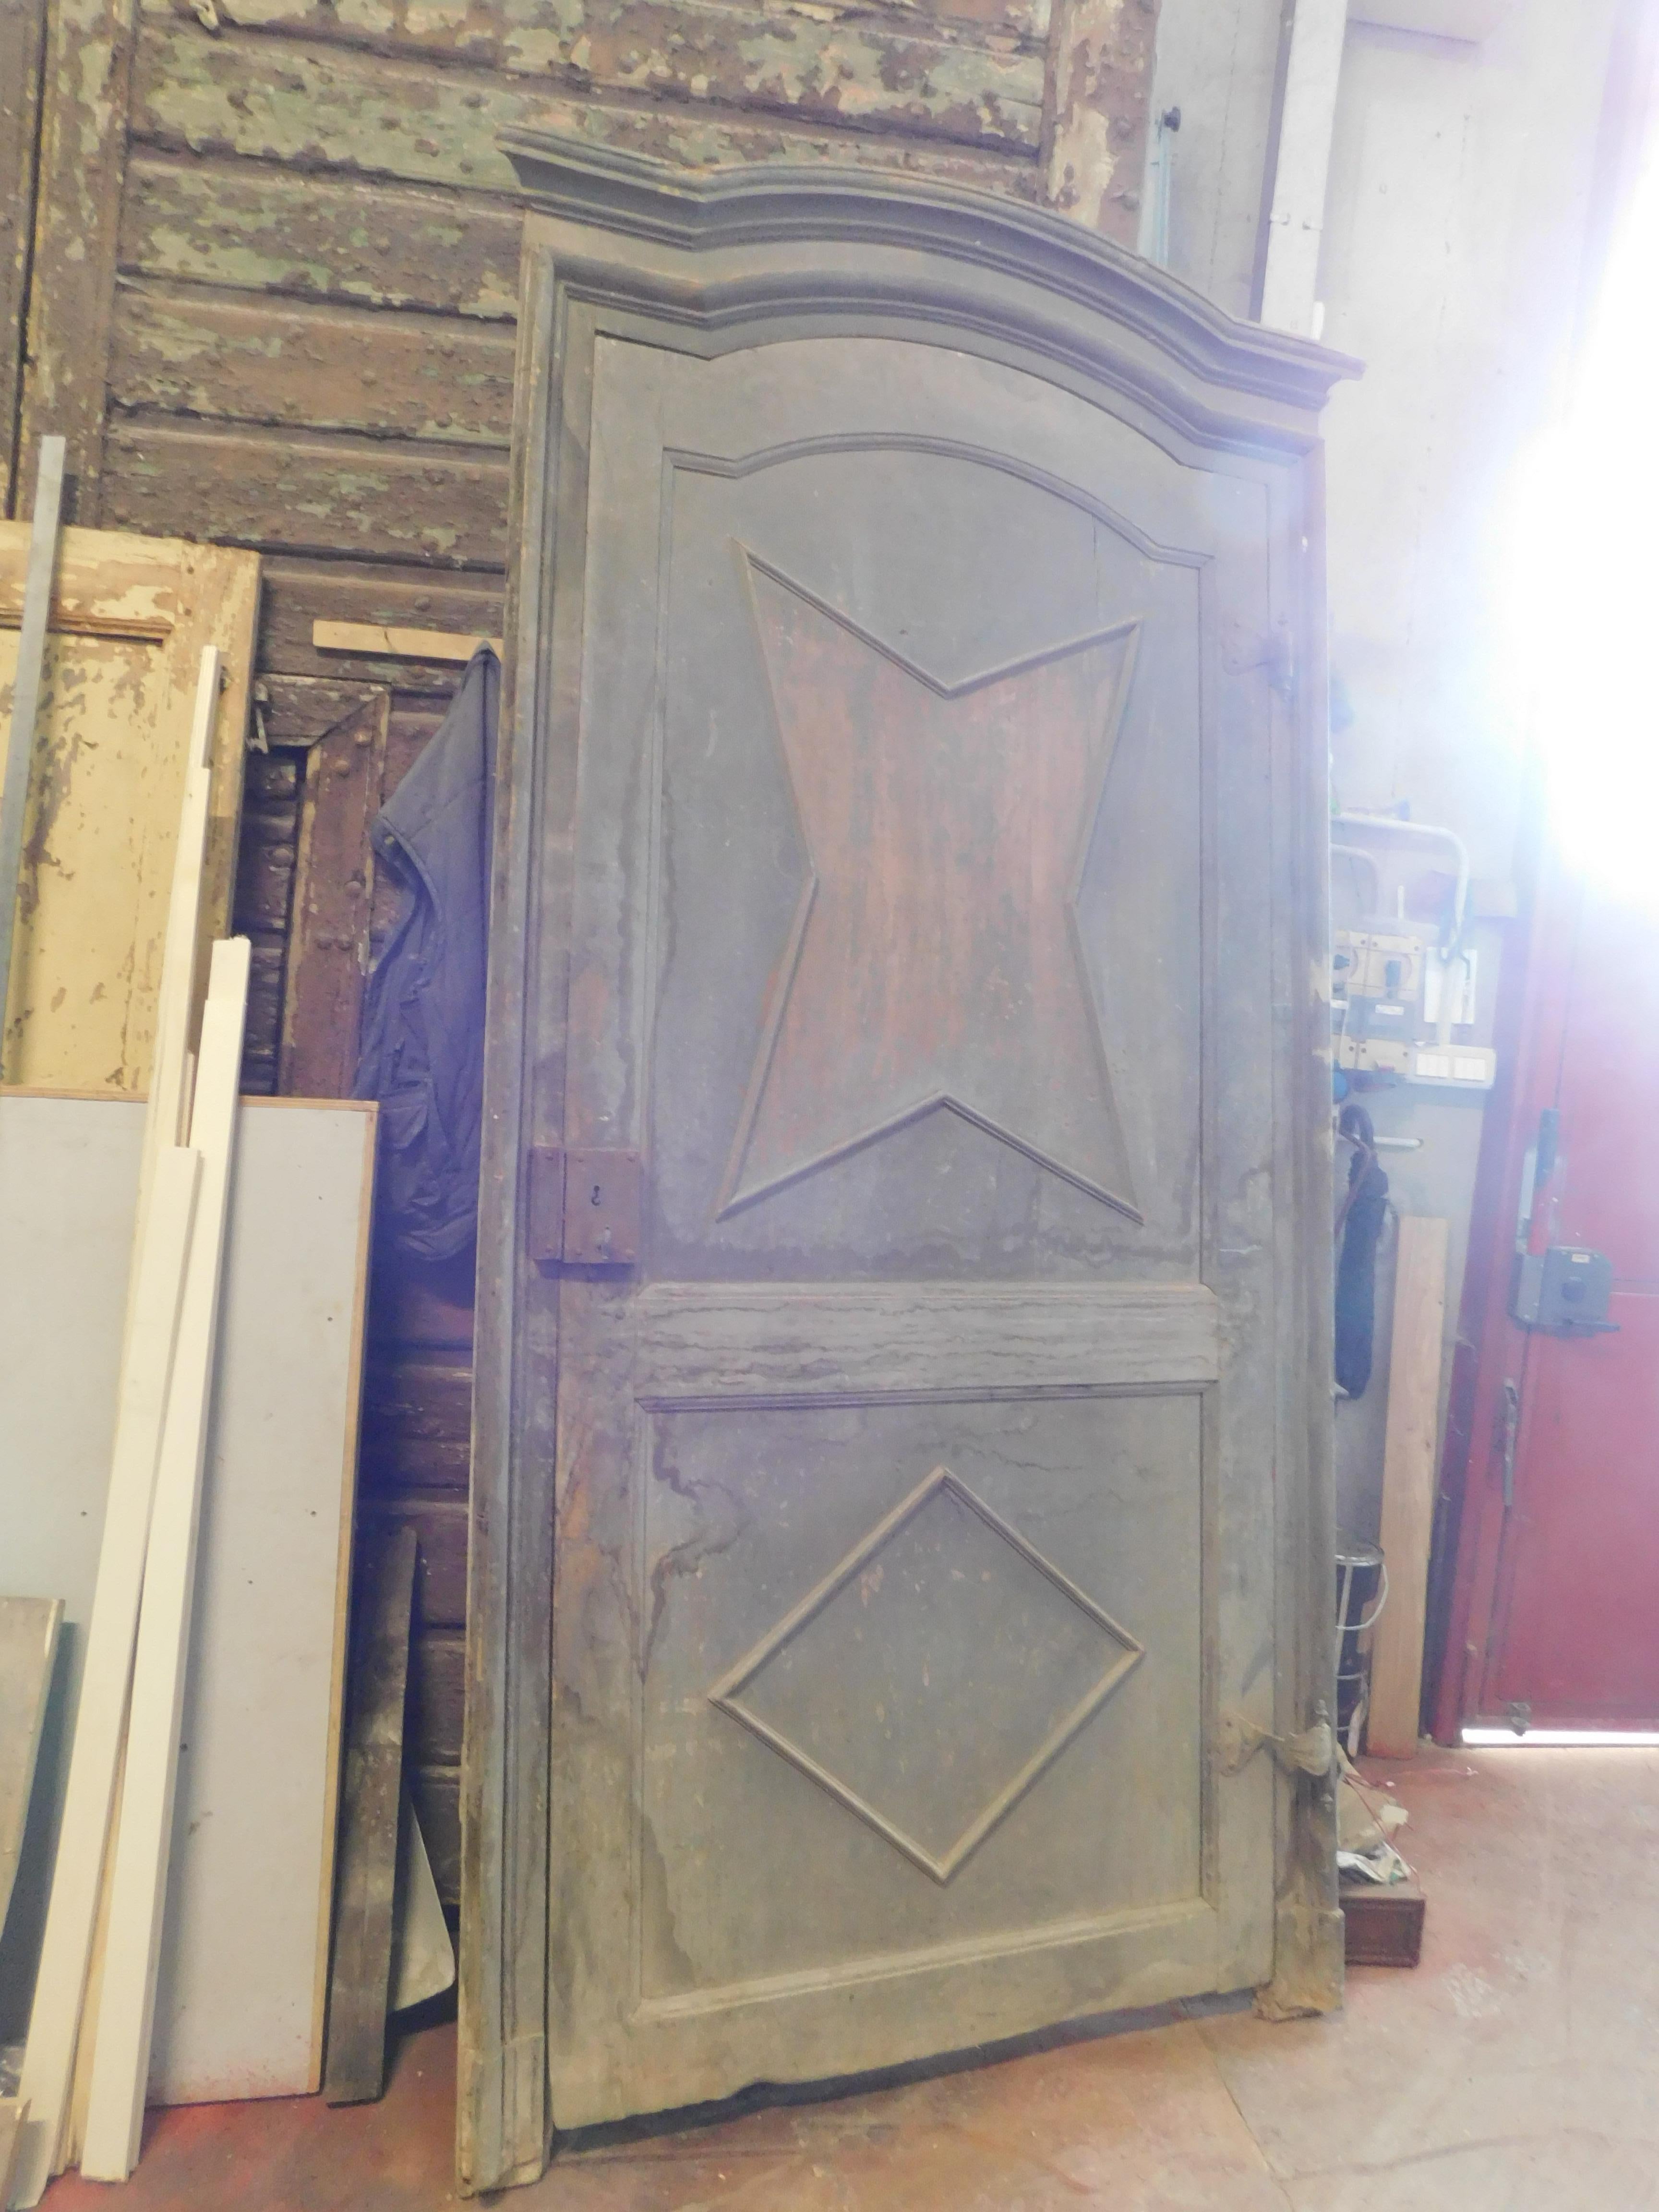 set of 5 blue lacquered antique doors, with frame and star decoration, 18th century from Italy, excellent original wood condition with handles and hinges, measure only internal door 104 x 231 H, beautiful, with the possibility of combining them all